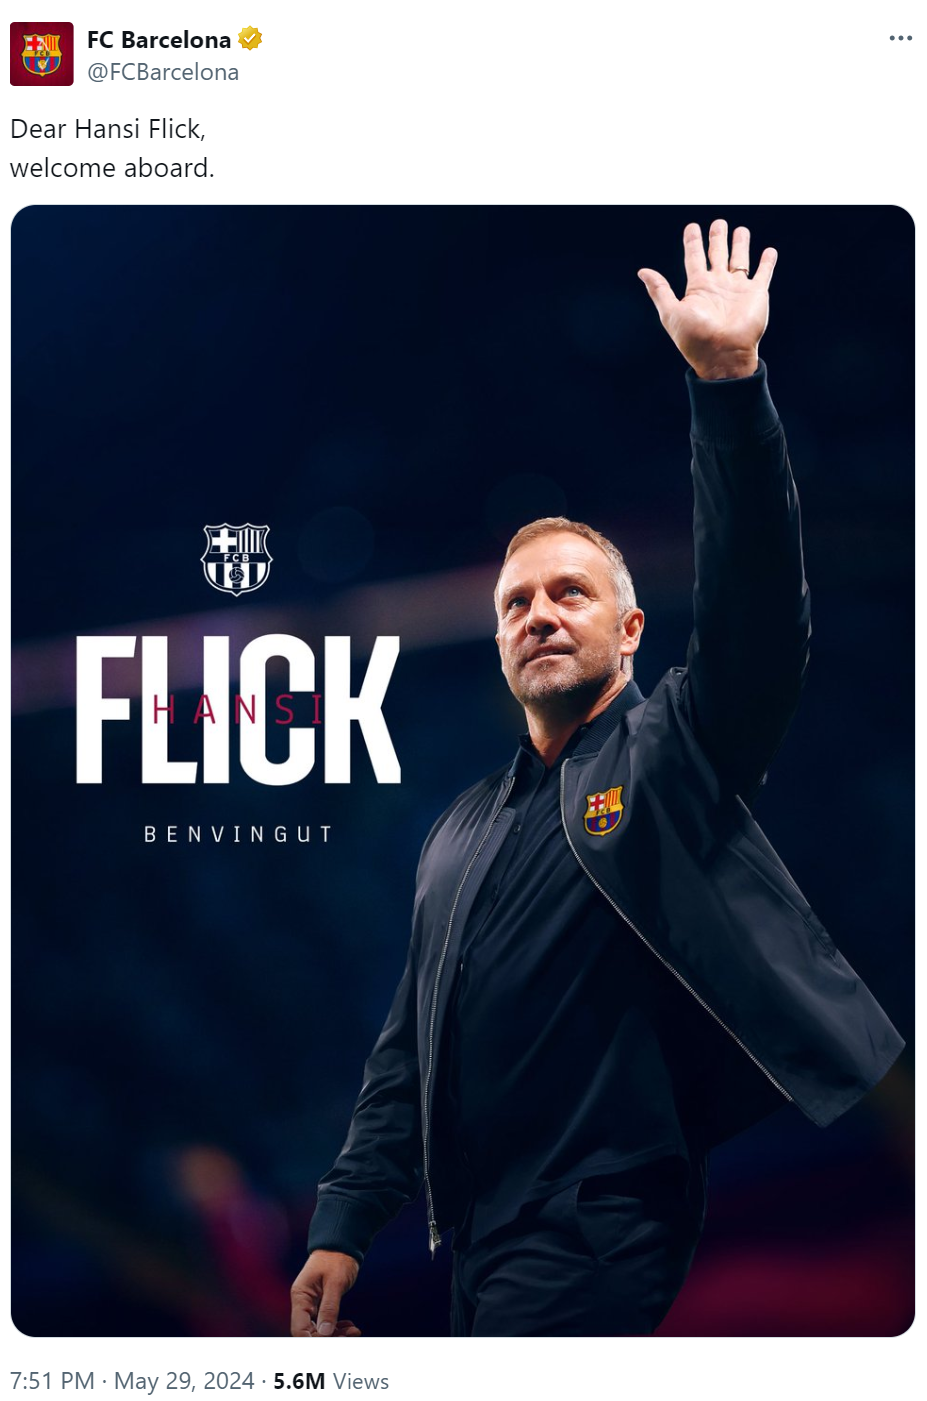 FC Barcelona's post on X on May 29 about Hansi Flick. /@FCBarcelona